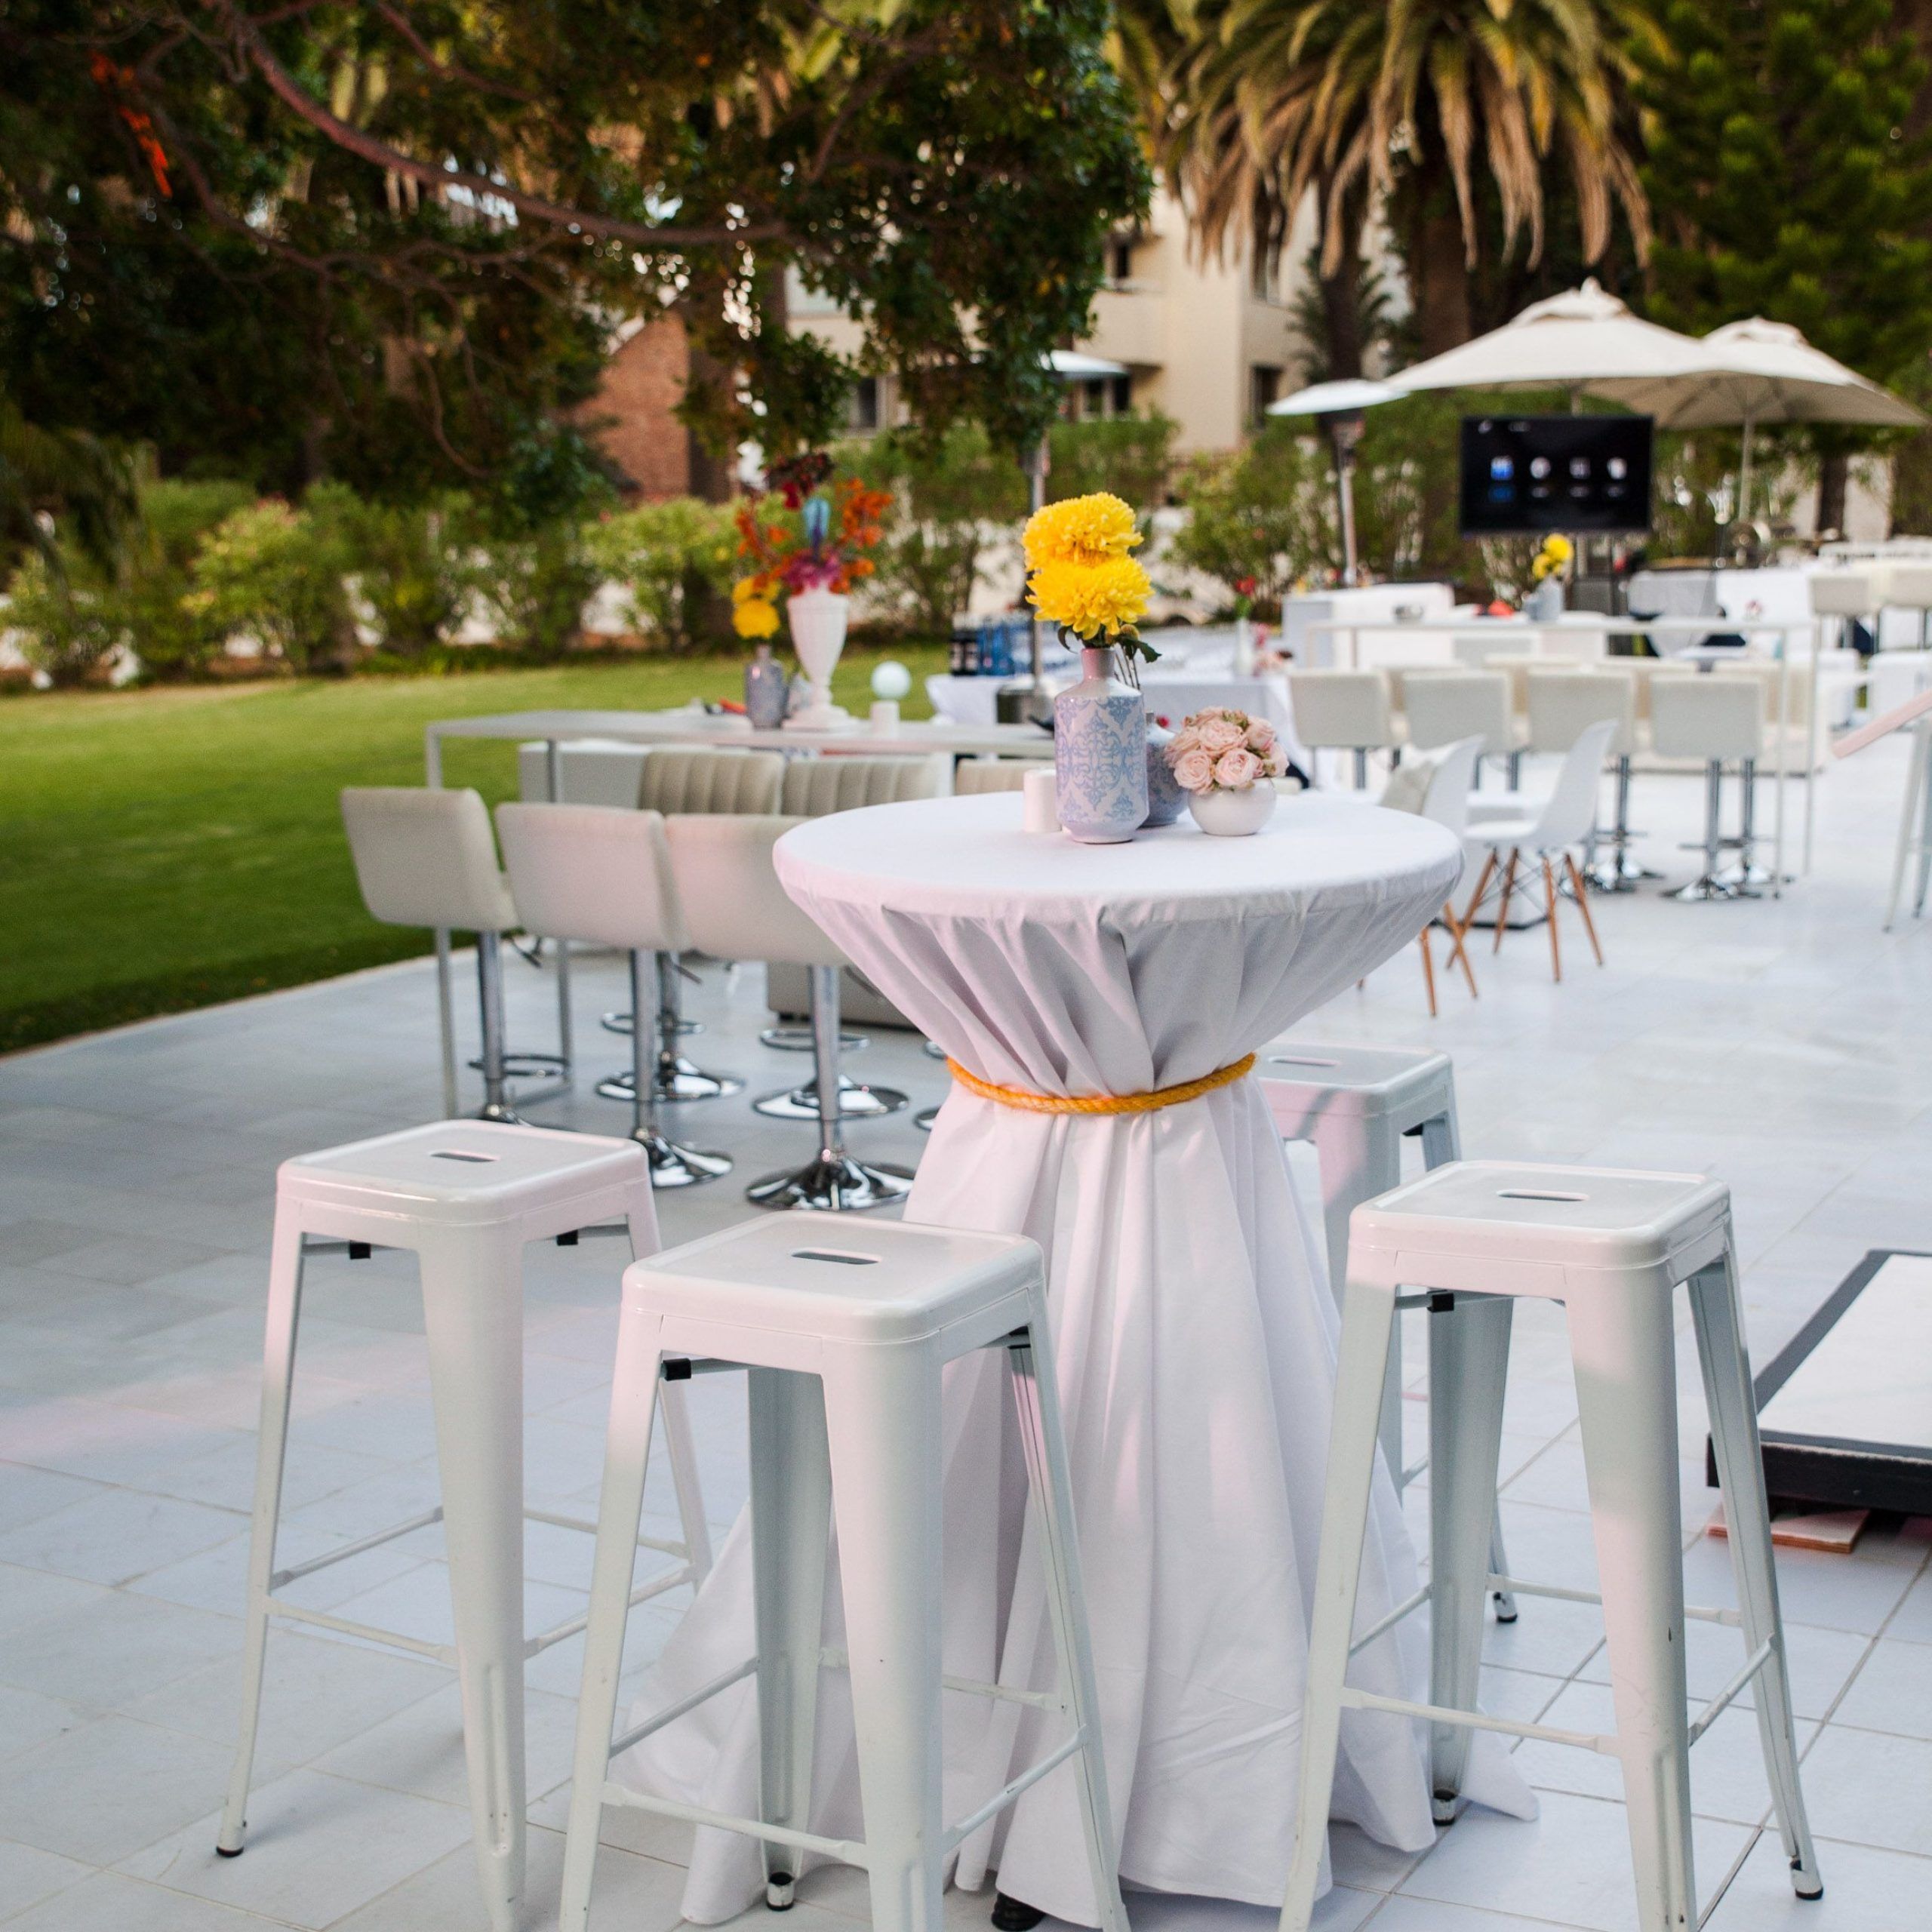 White Cocktail Furniture At An Outdoor Event For Pre Drinks Outdoor Regarding Natural Outdoor Cocktail Tables (View 7 of 15)